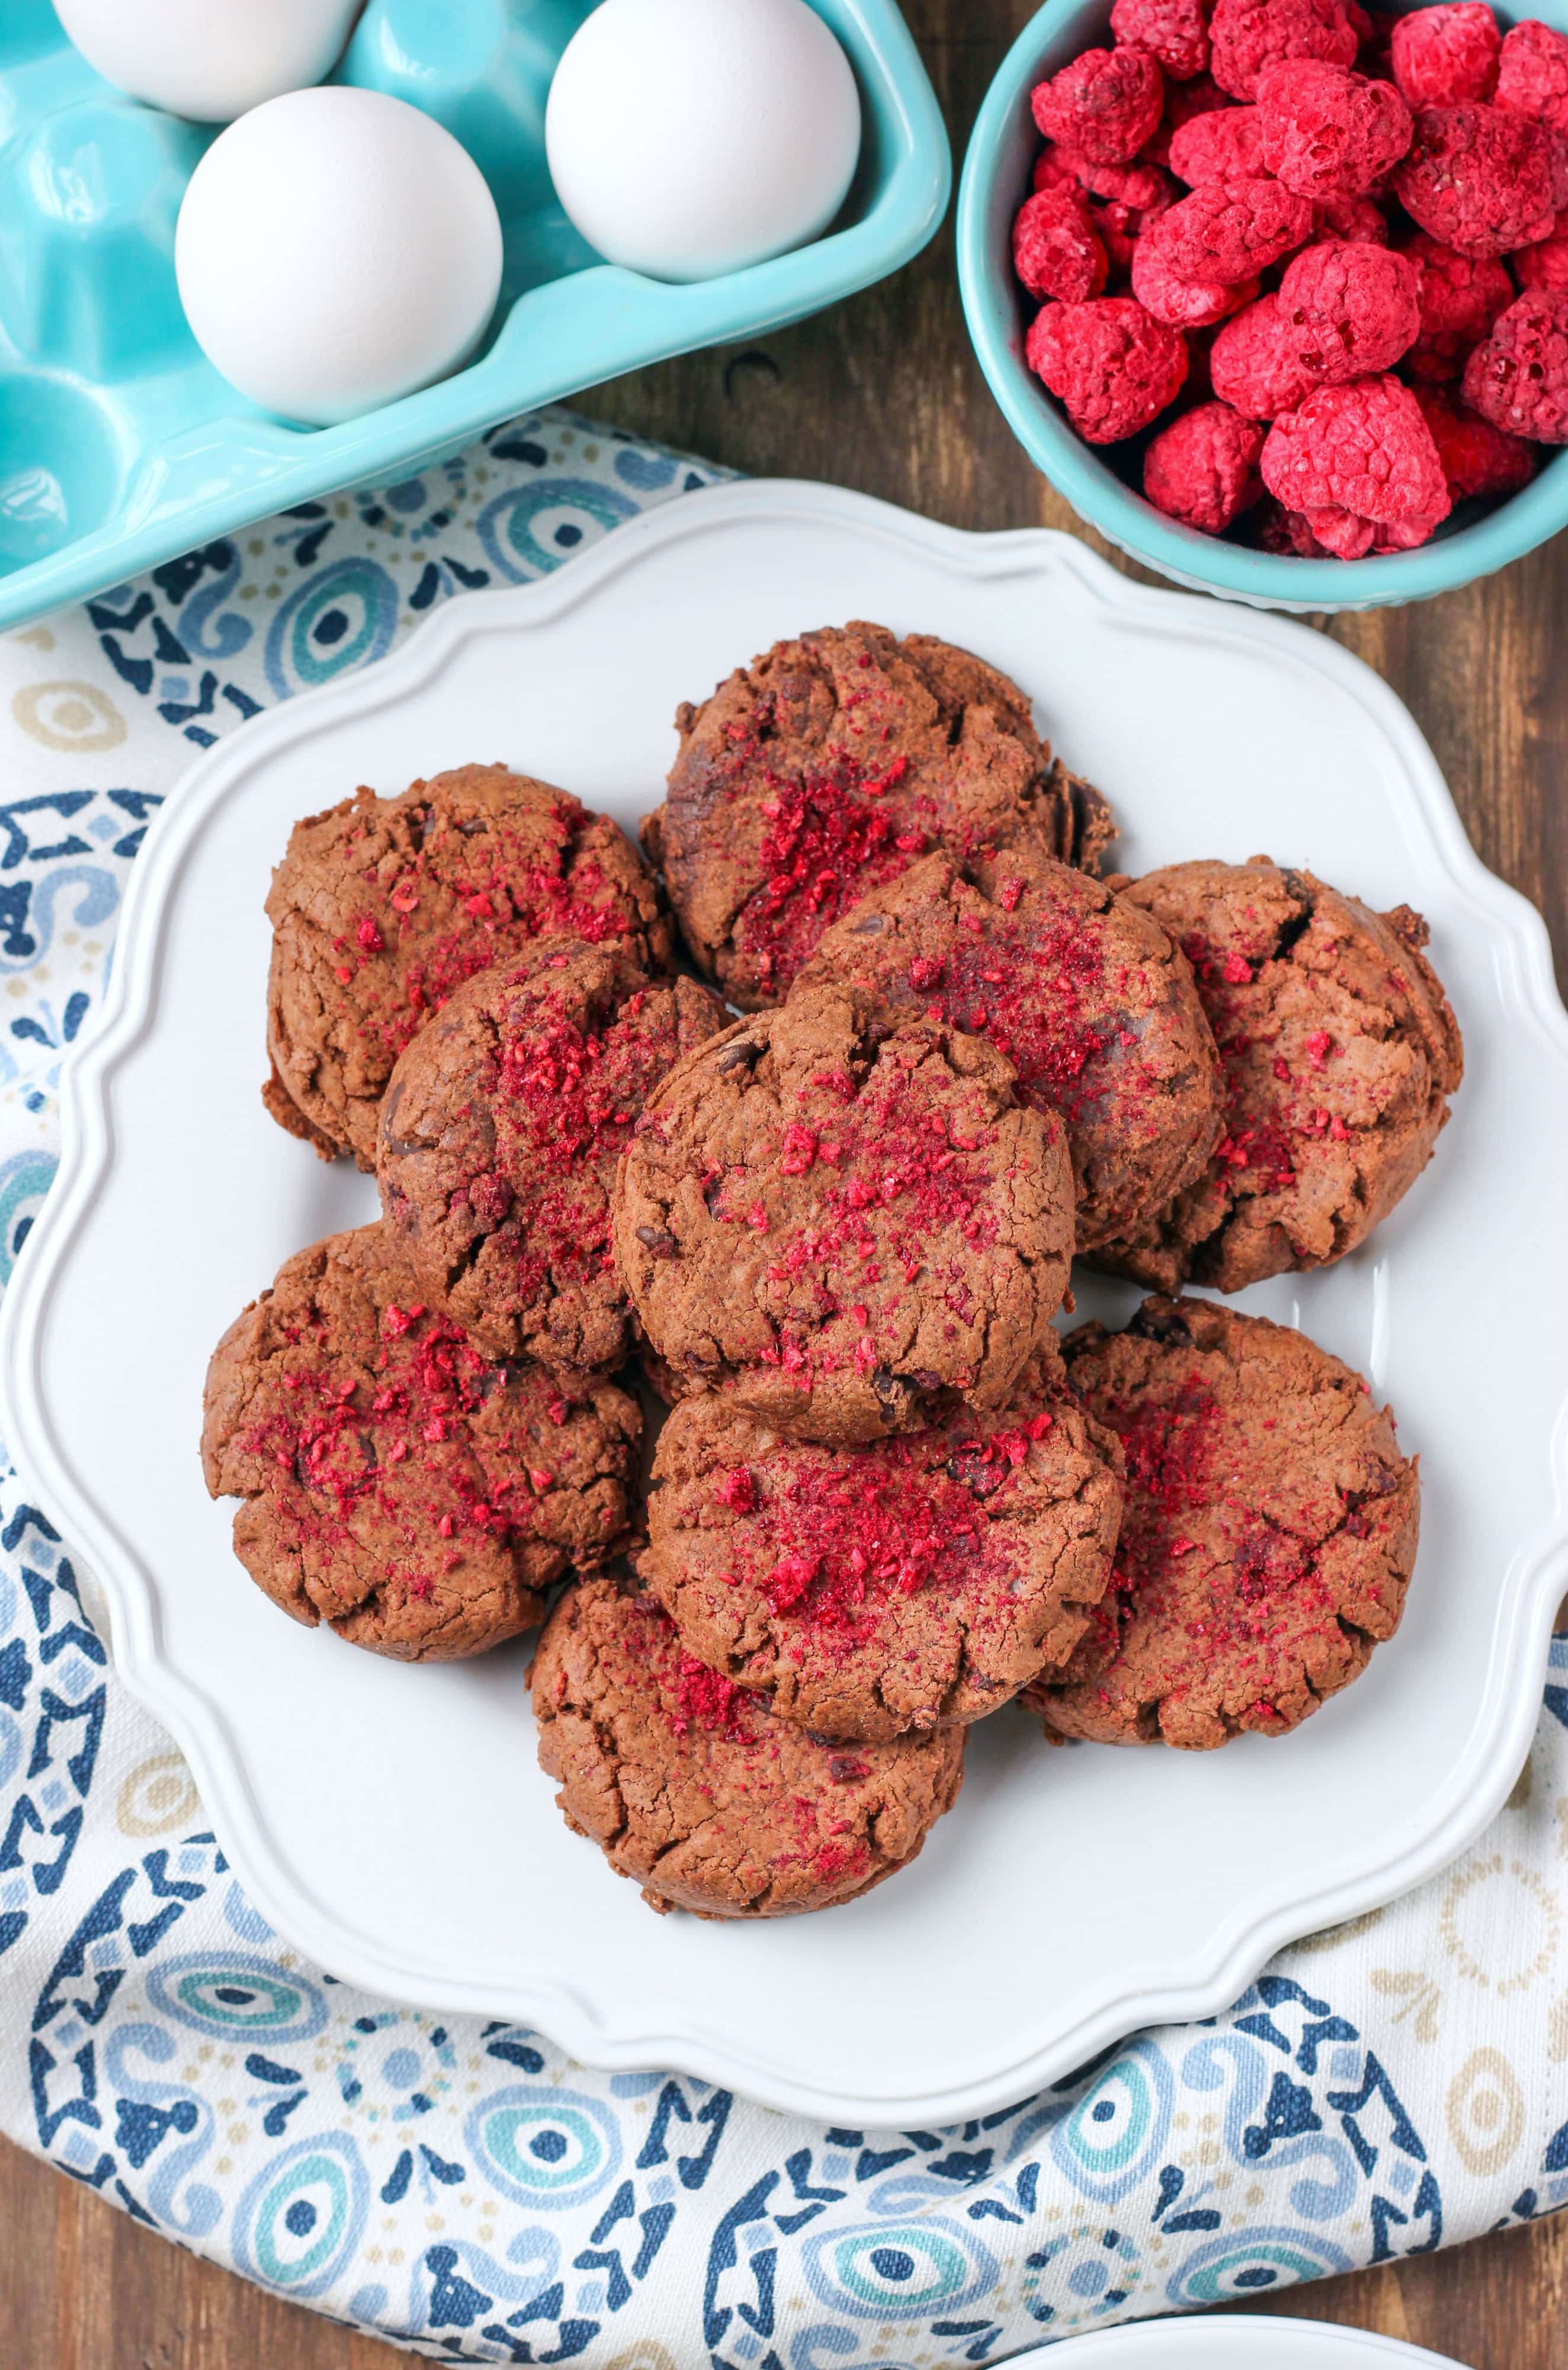 Raspberry Fudge Cookies Recipe filled with chocolate chips and freeze-dried raspberries!